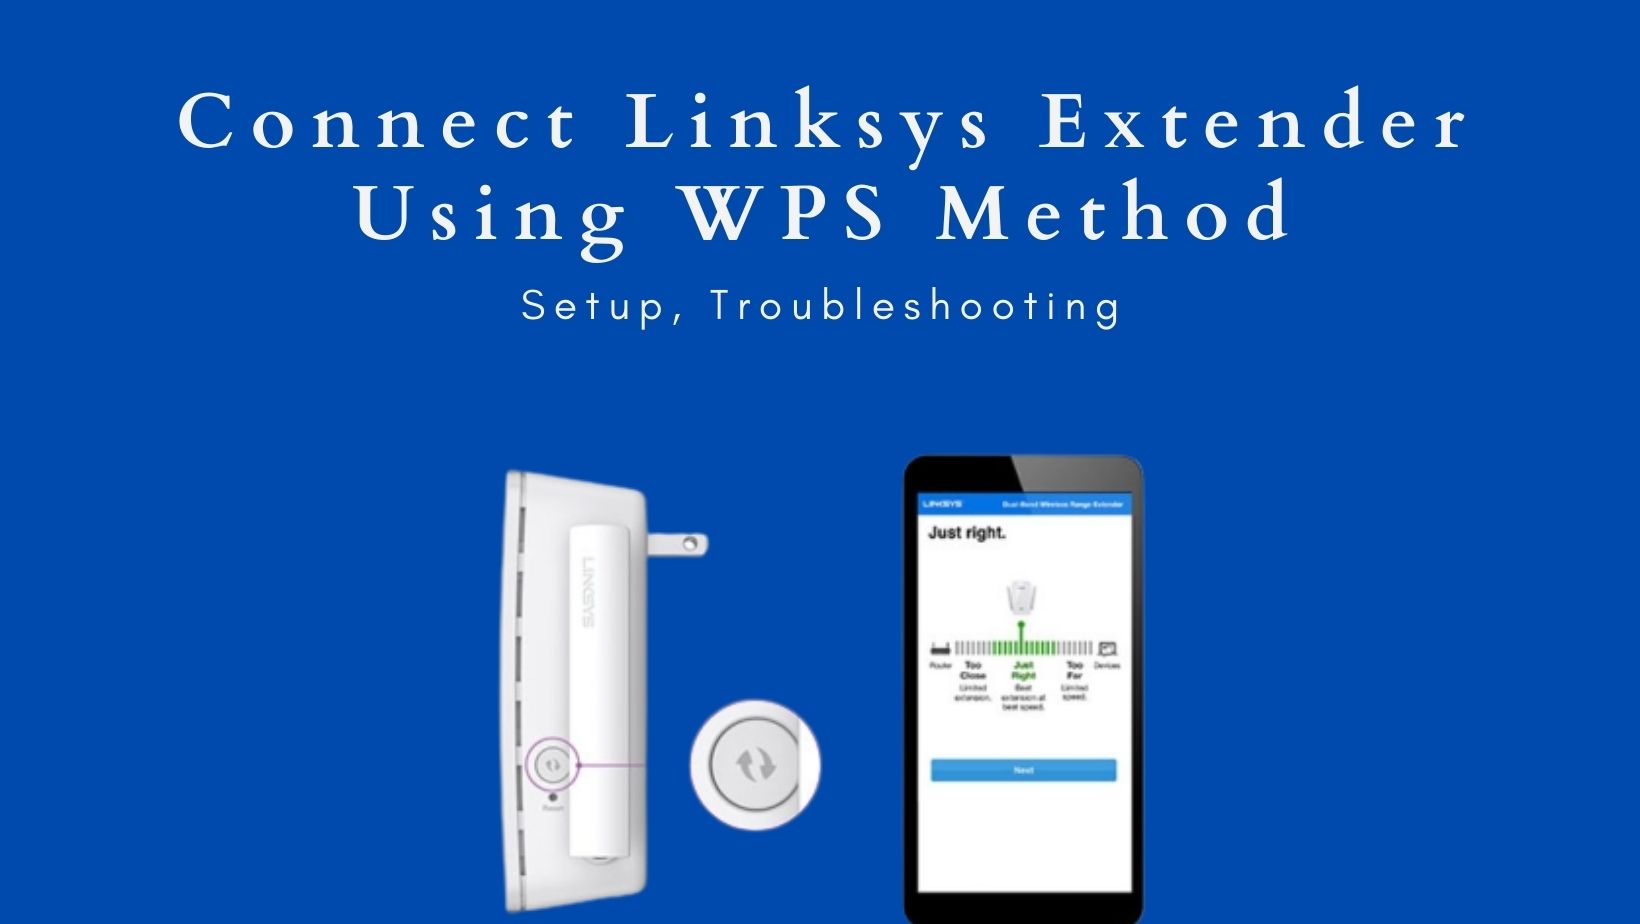 Connect Linksys Extender Using WPS Method